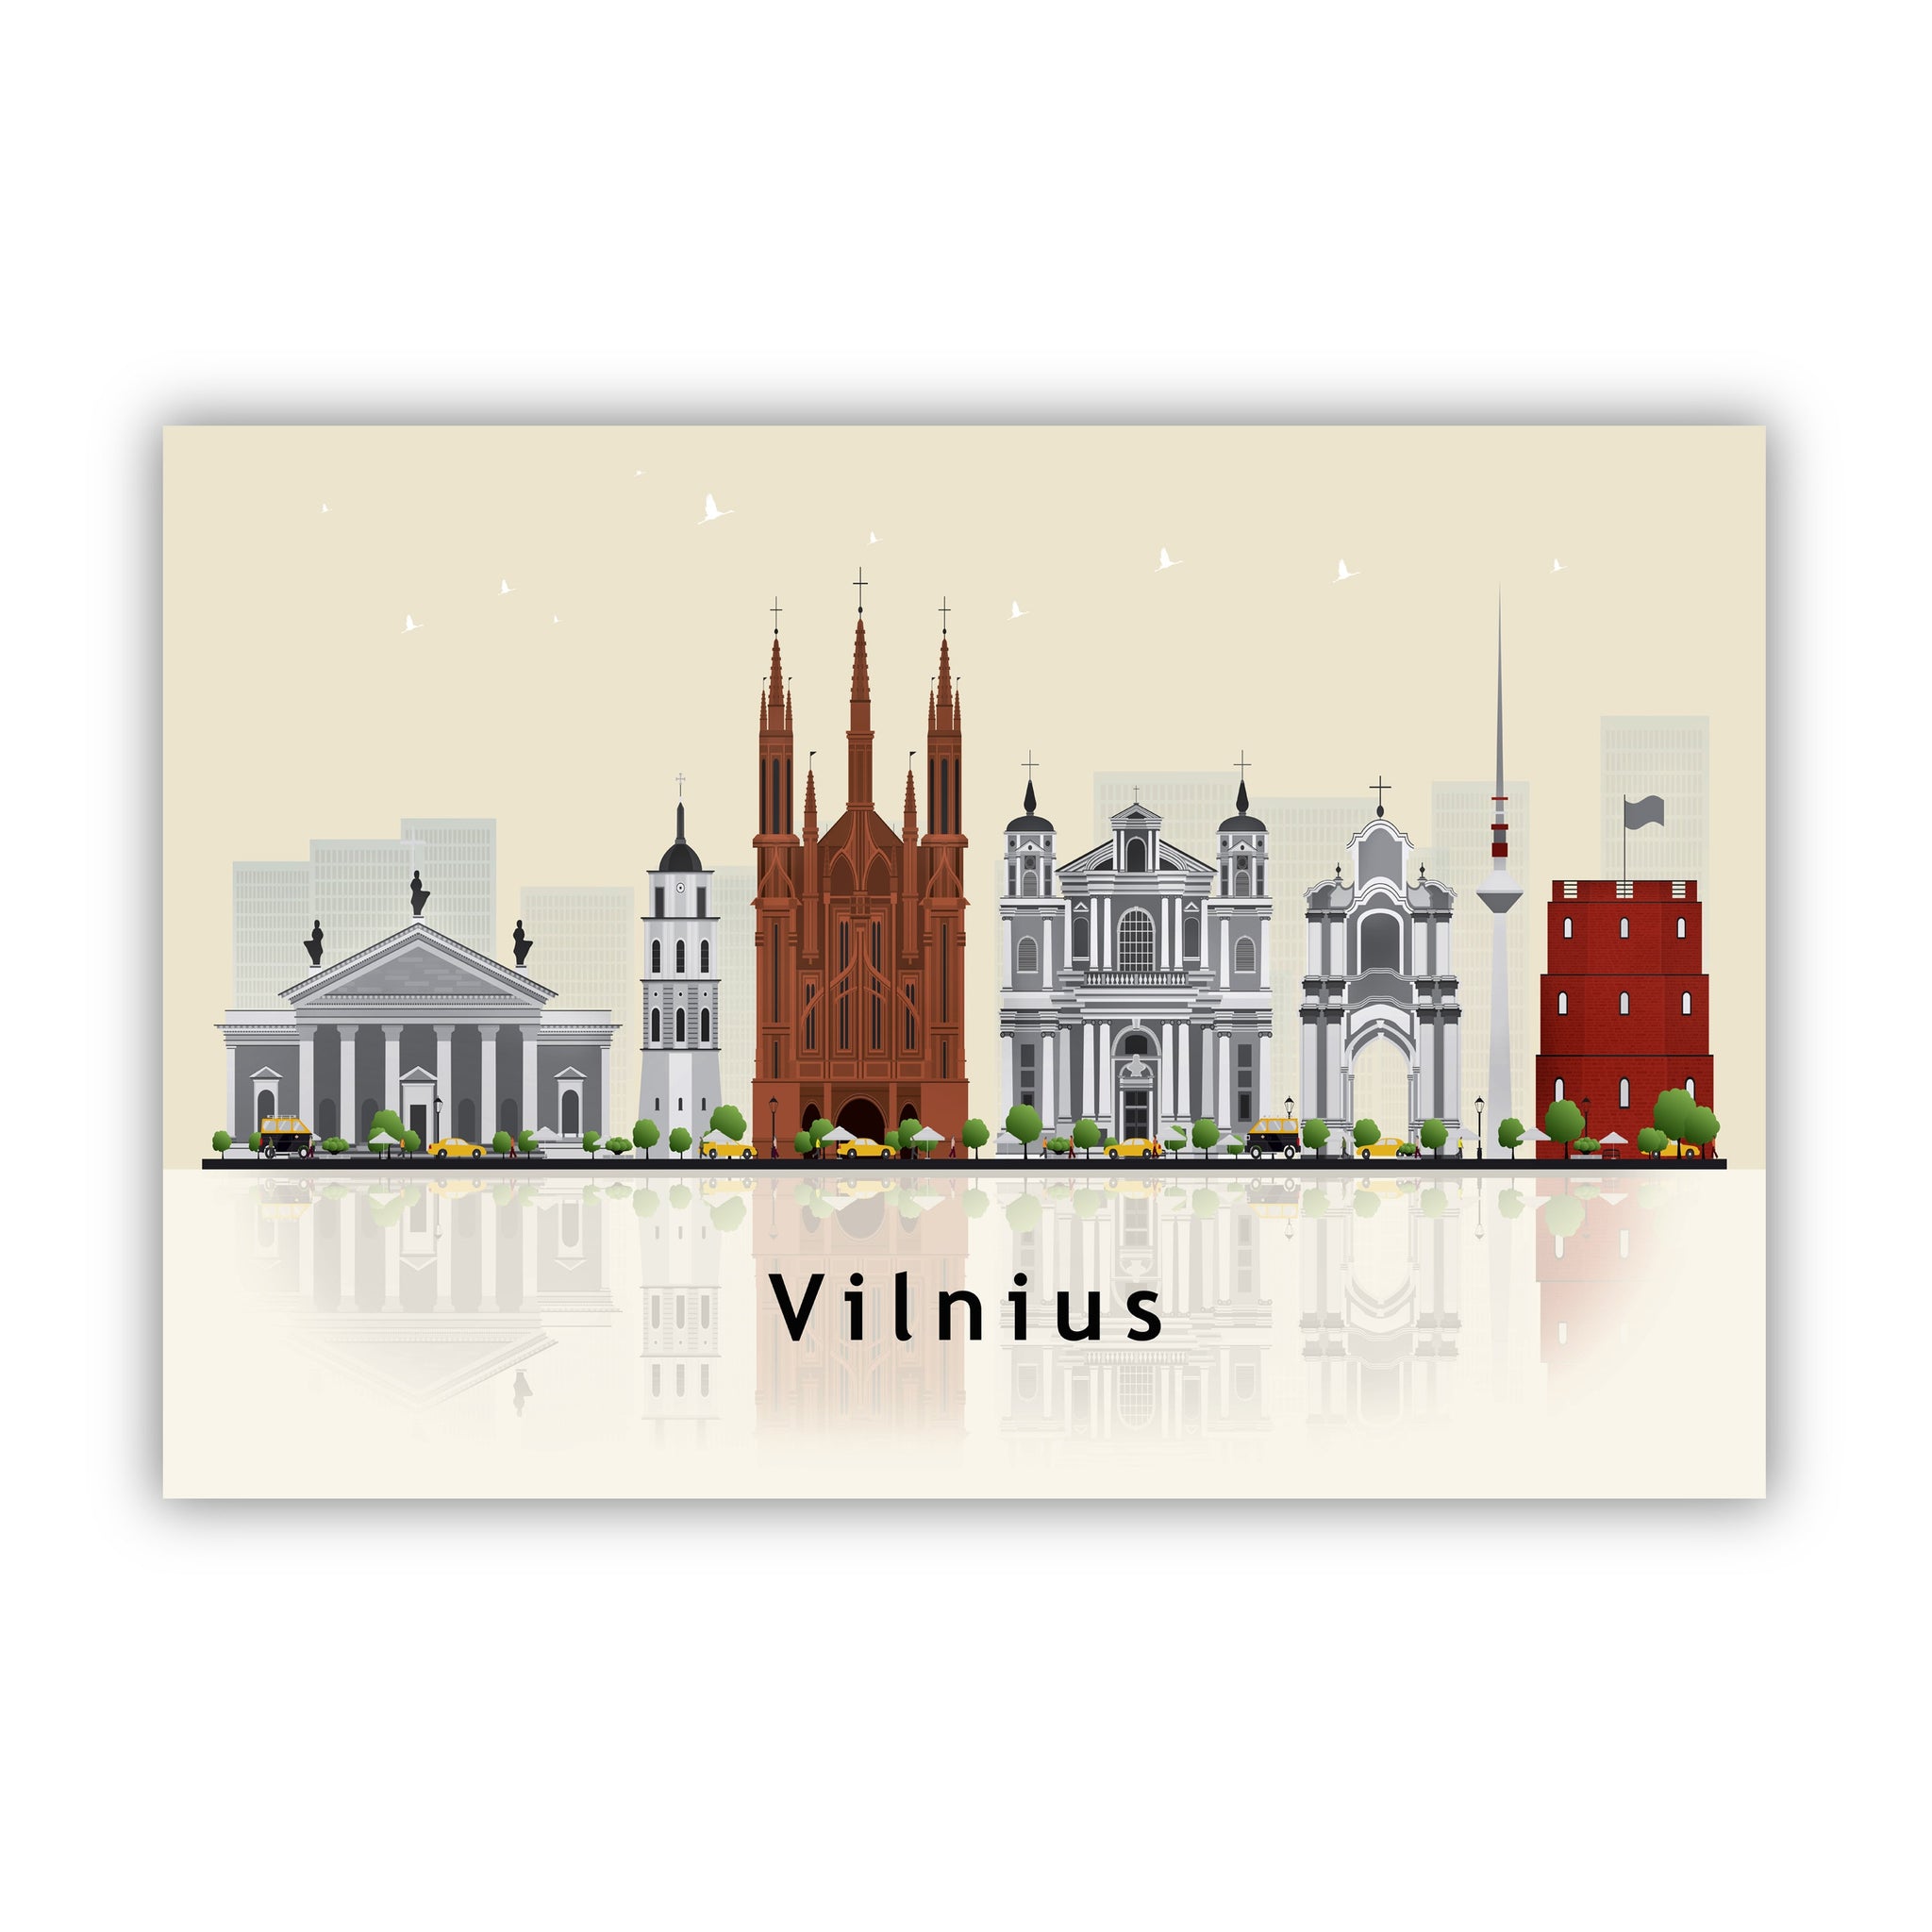 VILNIUS LITHUANIA  Illustration skyline poster, Modern skyline cityscape poster print, Vilnius landmark map poster, Home wall decoration